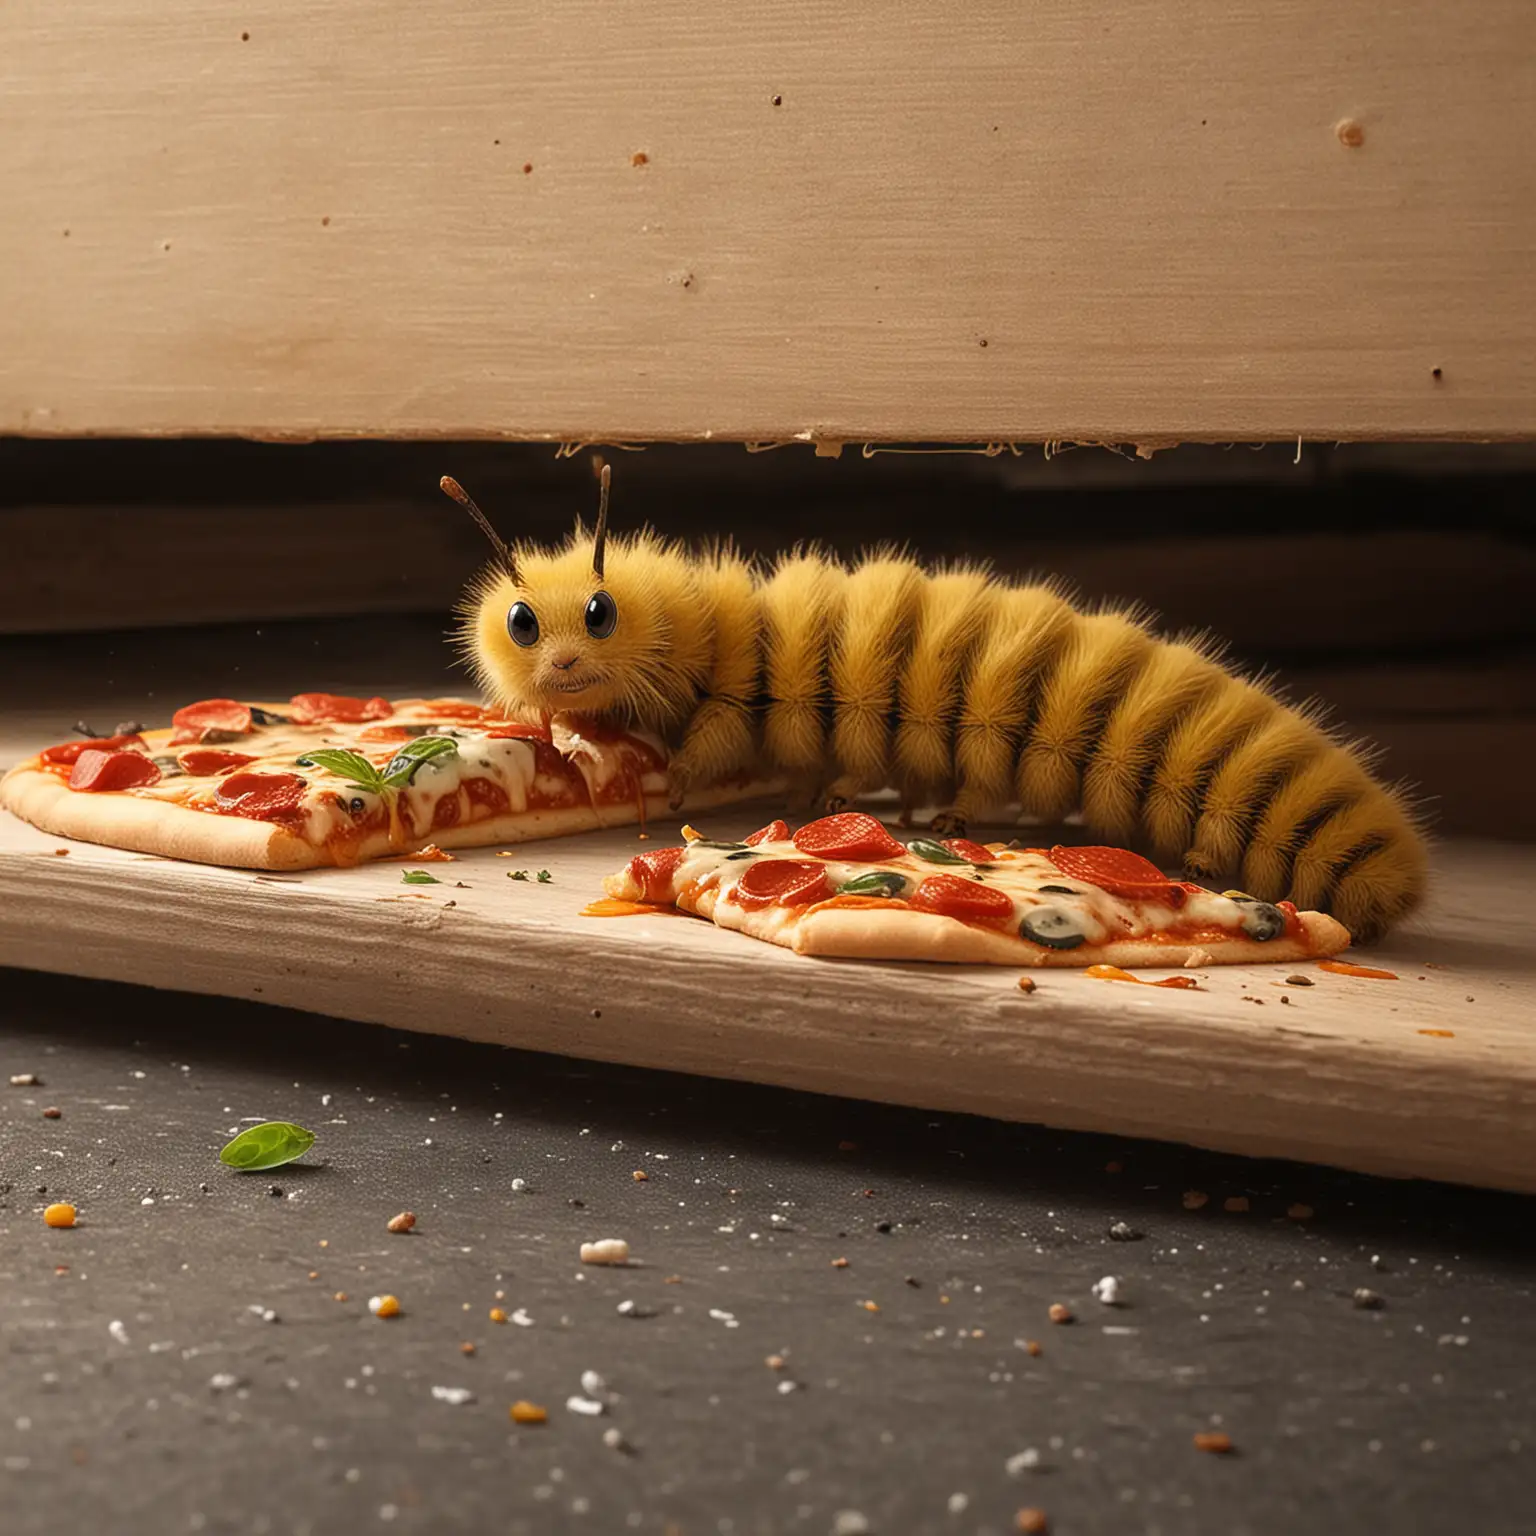 Hungry Caterpillar Enjoying Pizza in a Cozy Kitchen Garage